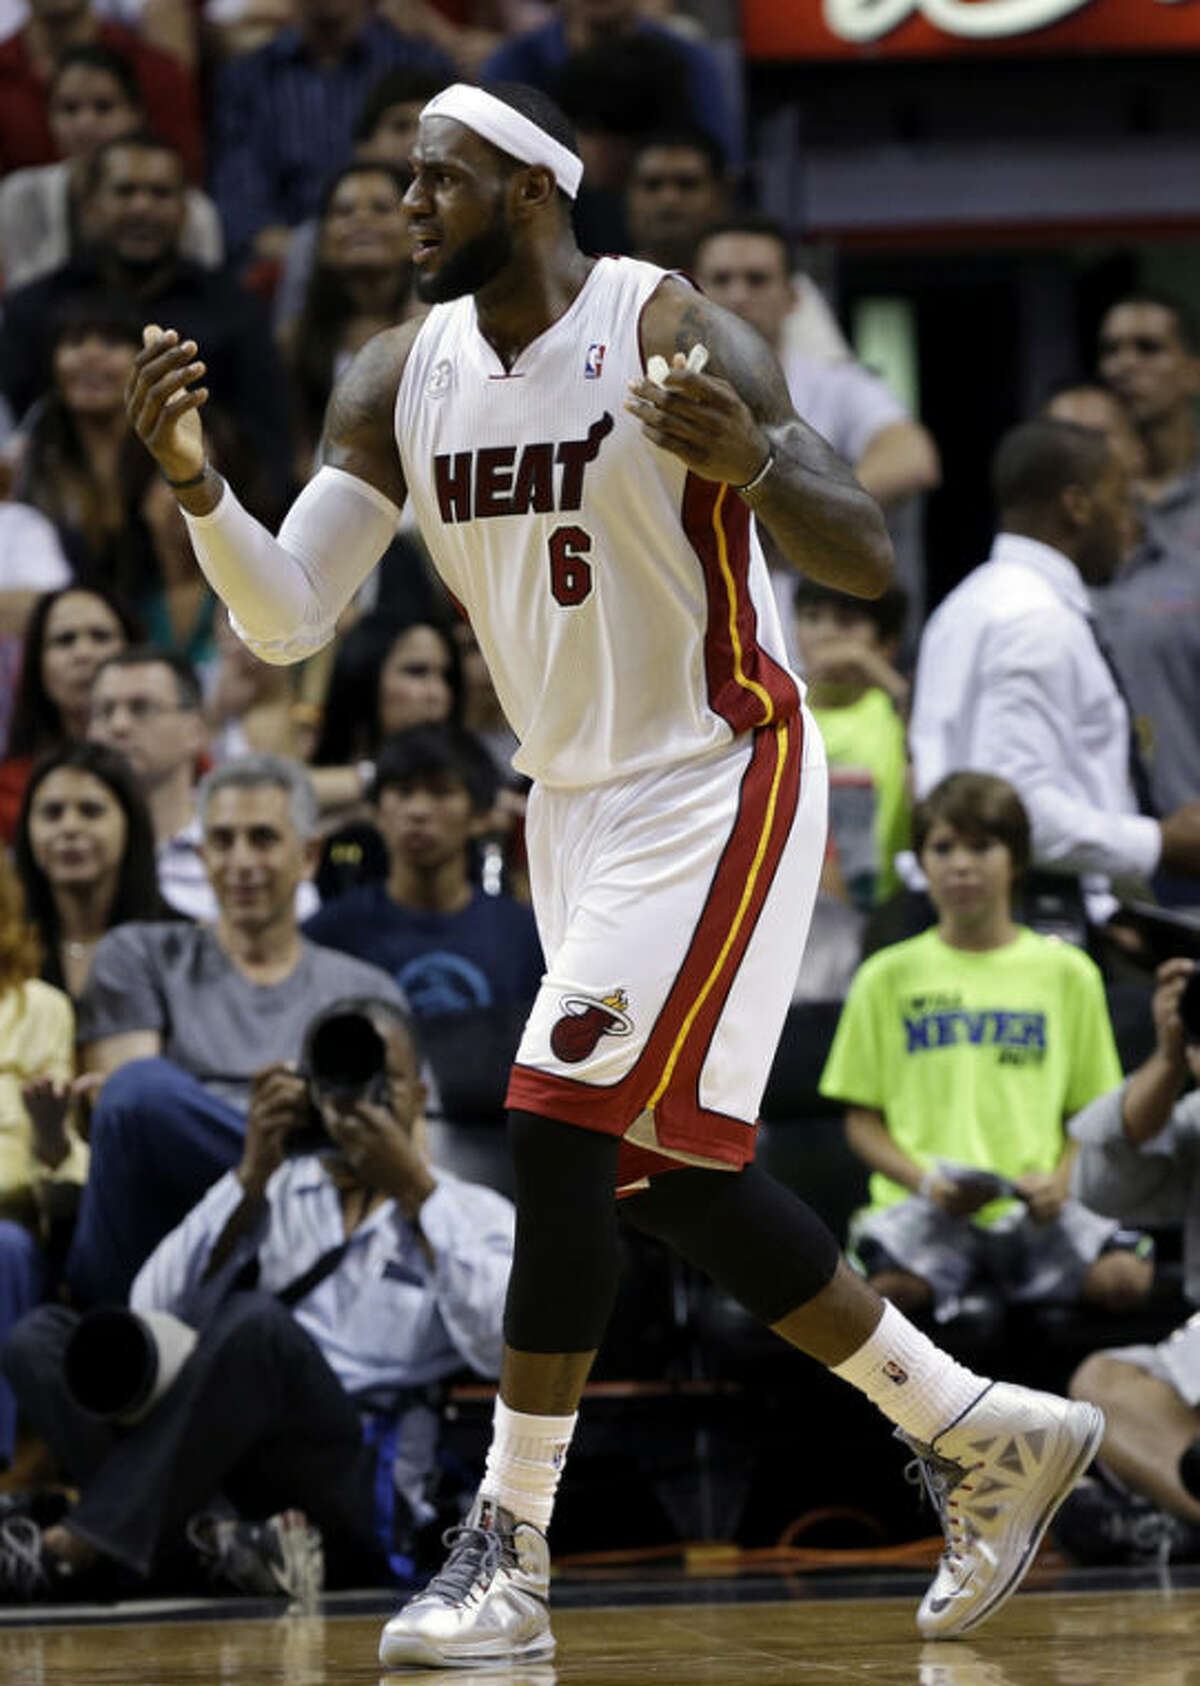 Miami Heat's LeBron James 96) reacts after being called for an offensive foul during the first half of an NBA basketball game against the Chicago Bulls Sunday April 14, 2013, in Miami. (AP Photo/Lynne Sladky)